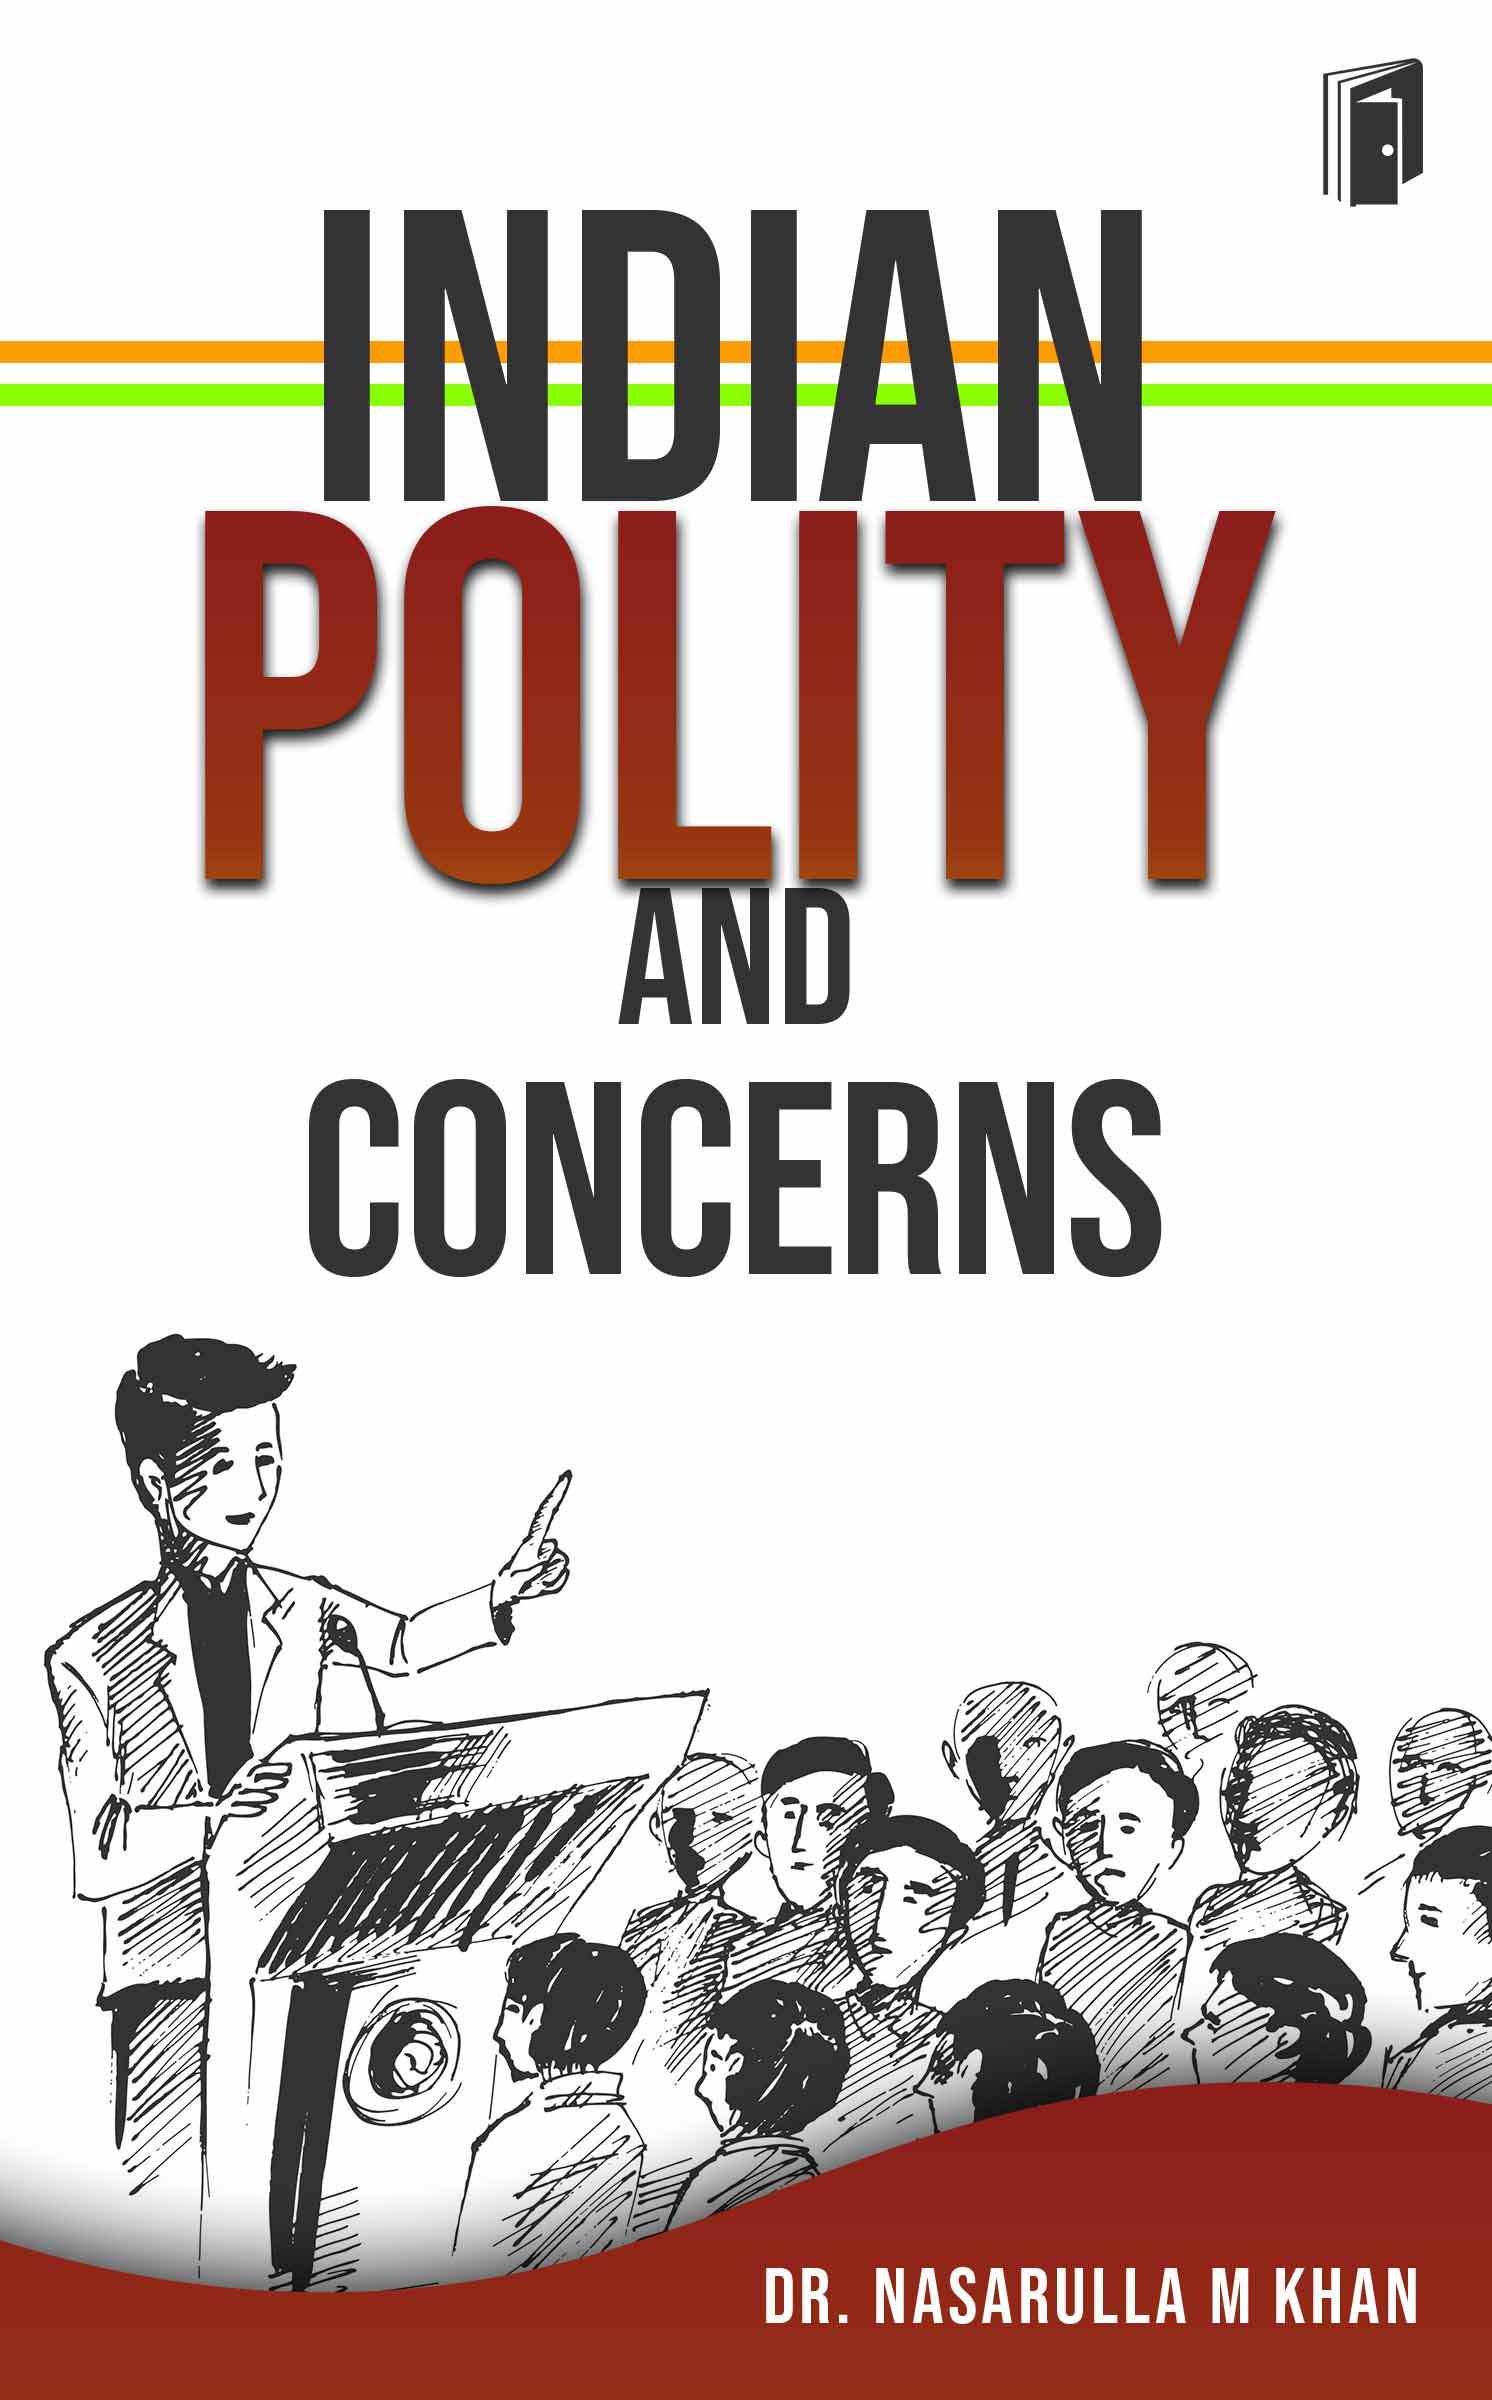 INDIAN POLITY AND CONCERNS